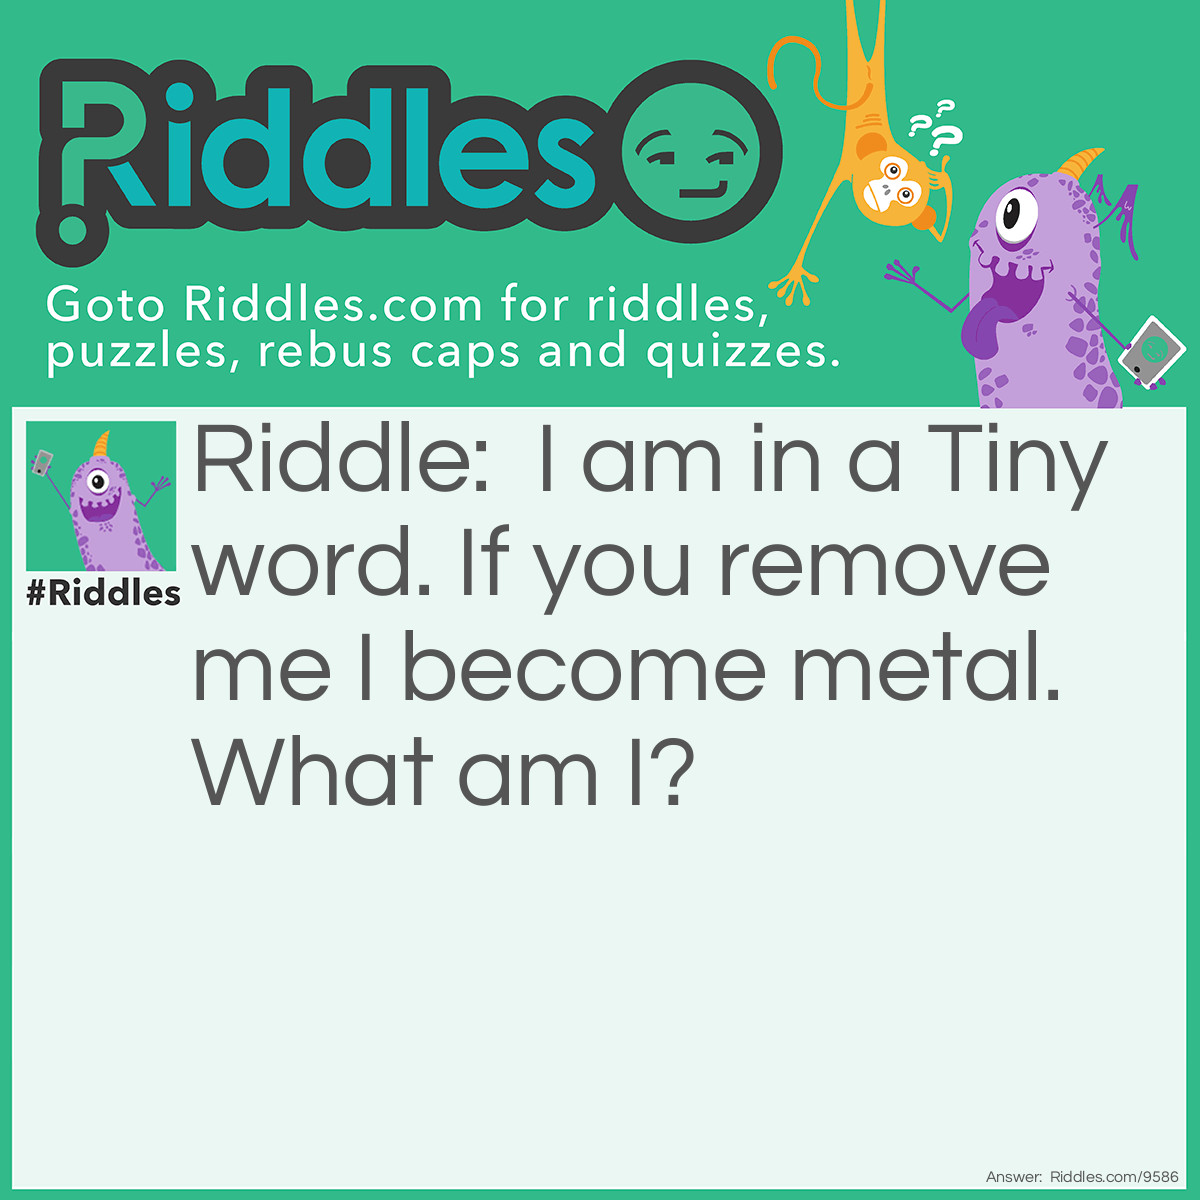 Riddle: I am in a Tiny word. If you remove me I become metal. What am I? Answer: The letter Y. Remove the letter "y" from the word "tiny" and you get the word "tin" which is made from metal.